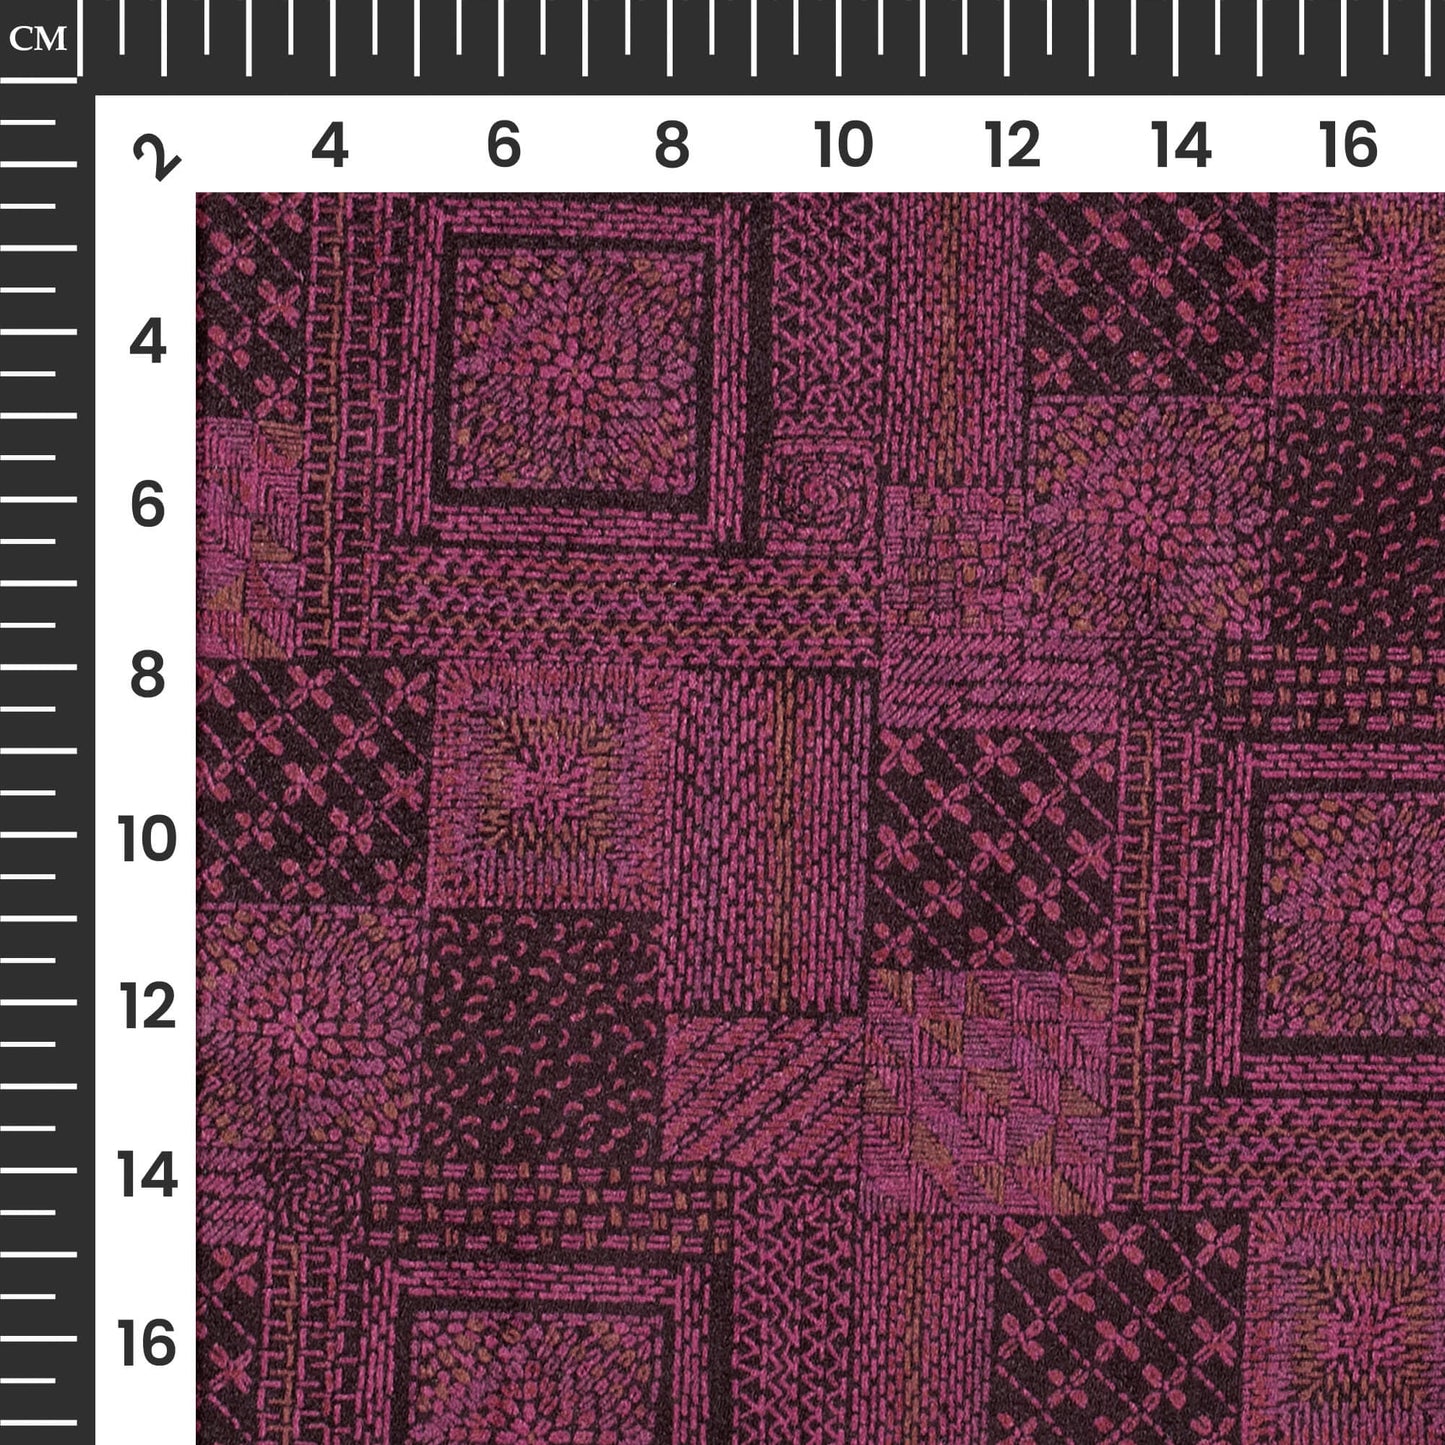 Ancient Geomatric Printed Deluxe Suede Fabric